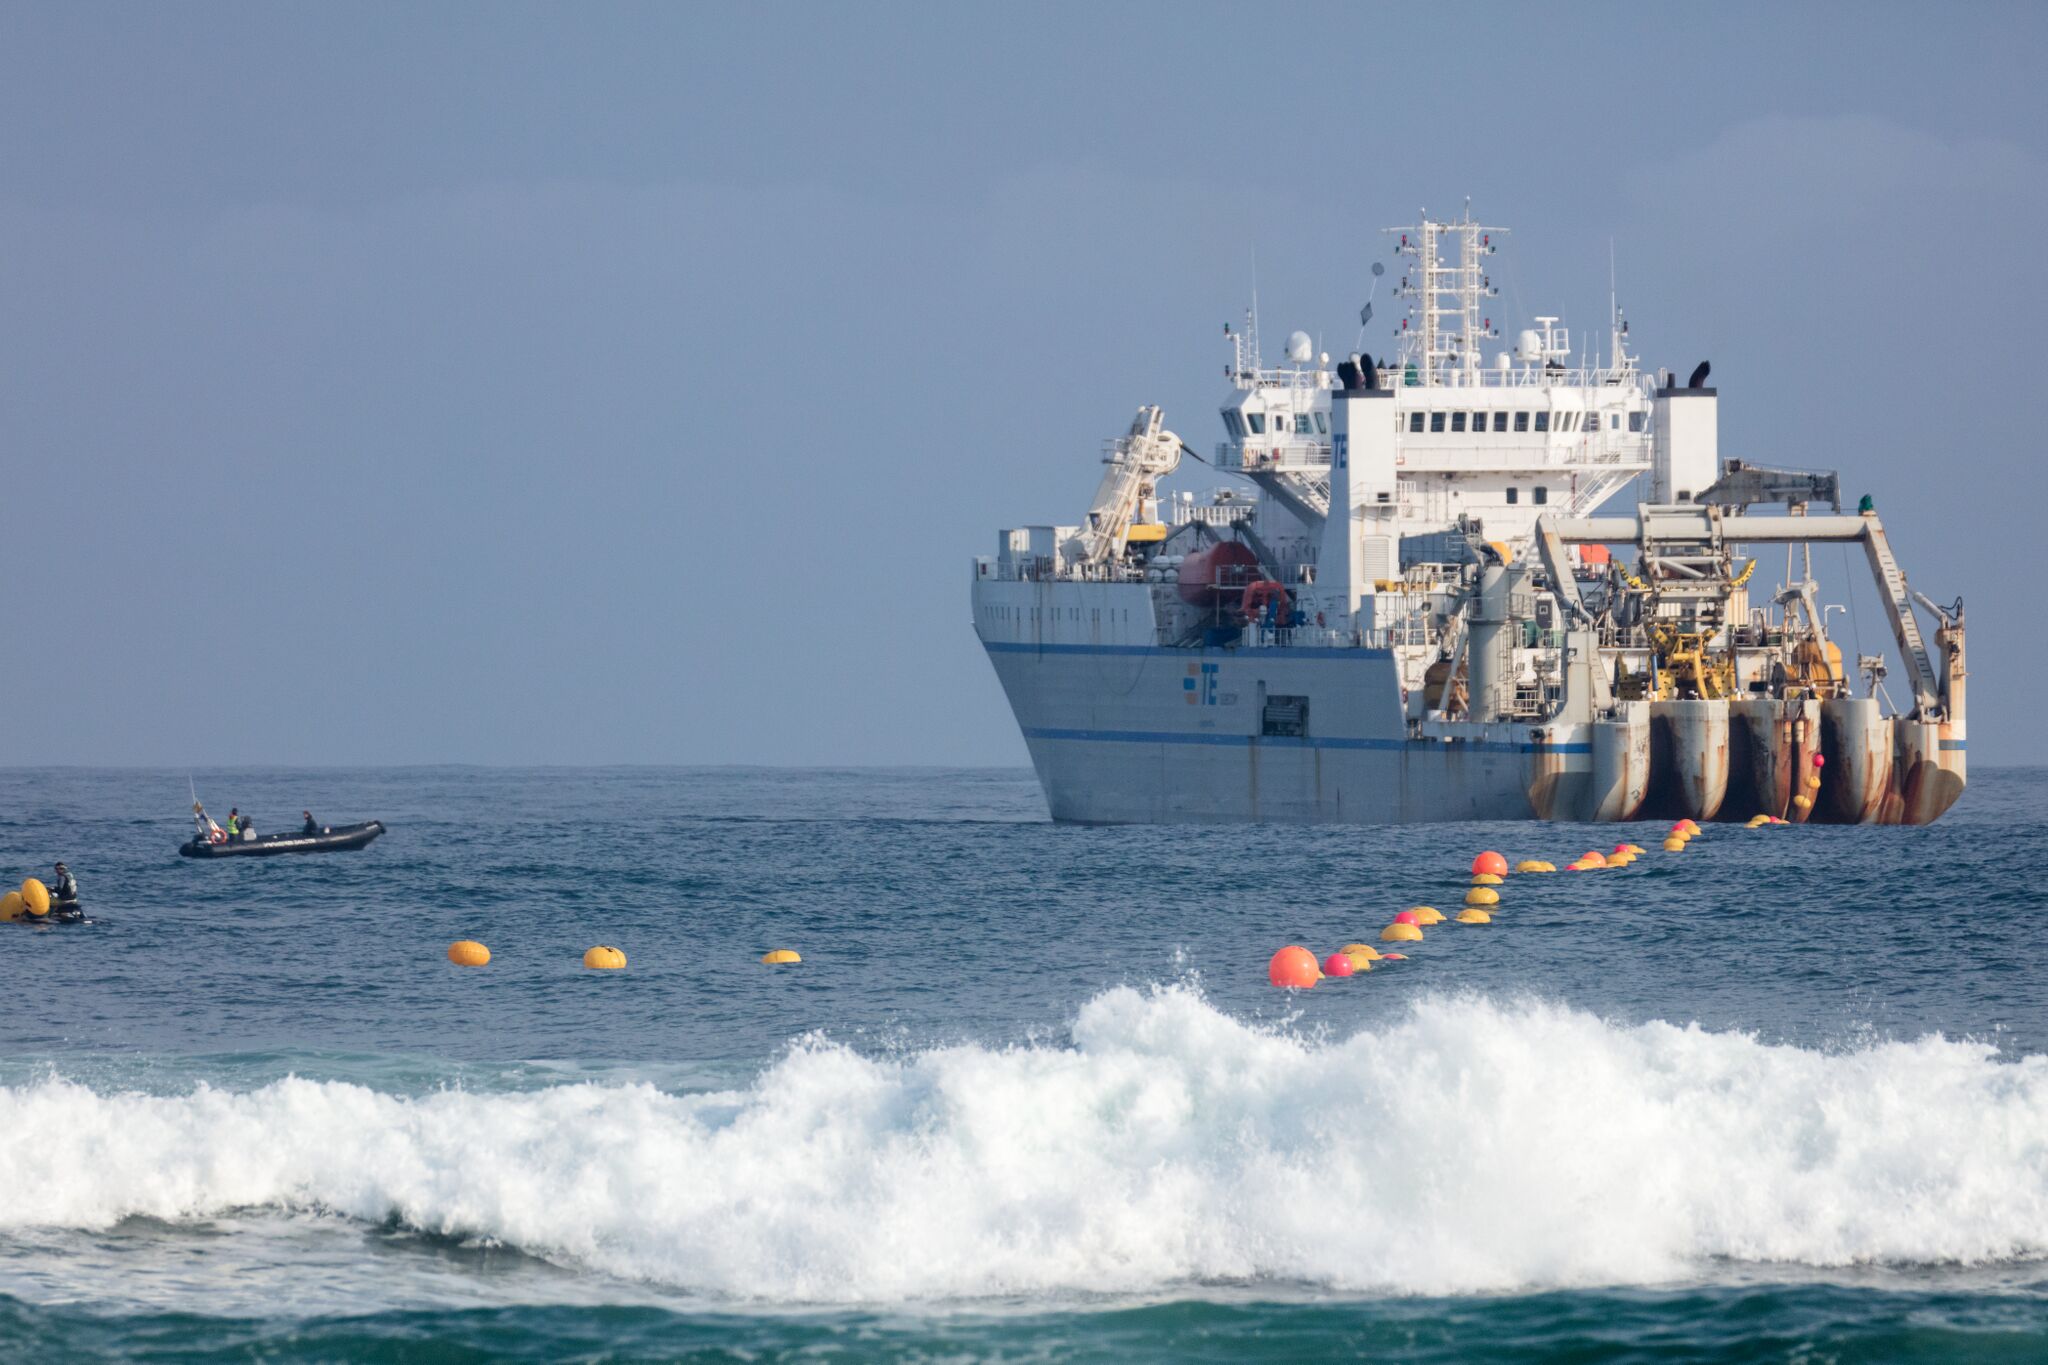 Facebook and Microsoft complete work on 160-terabits-per-second subsea data cable